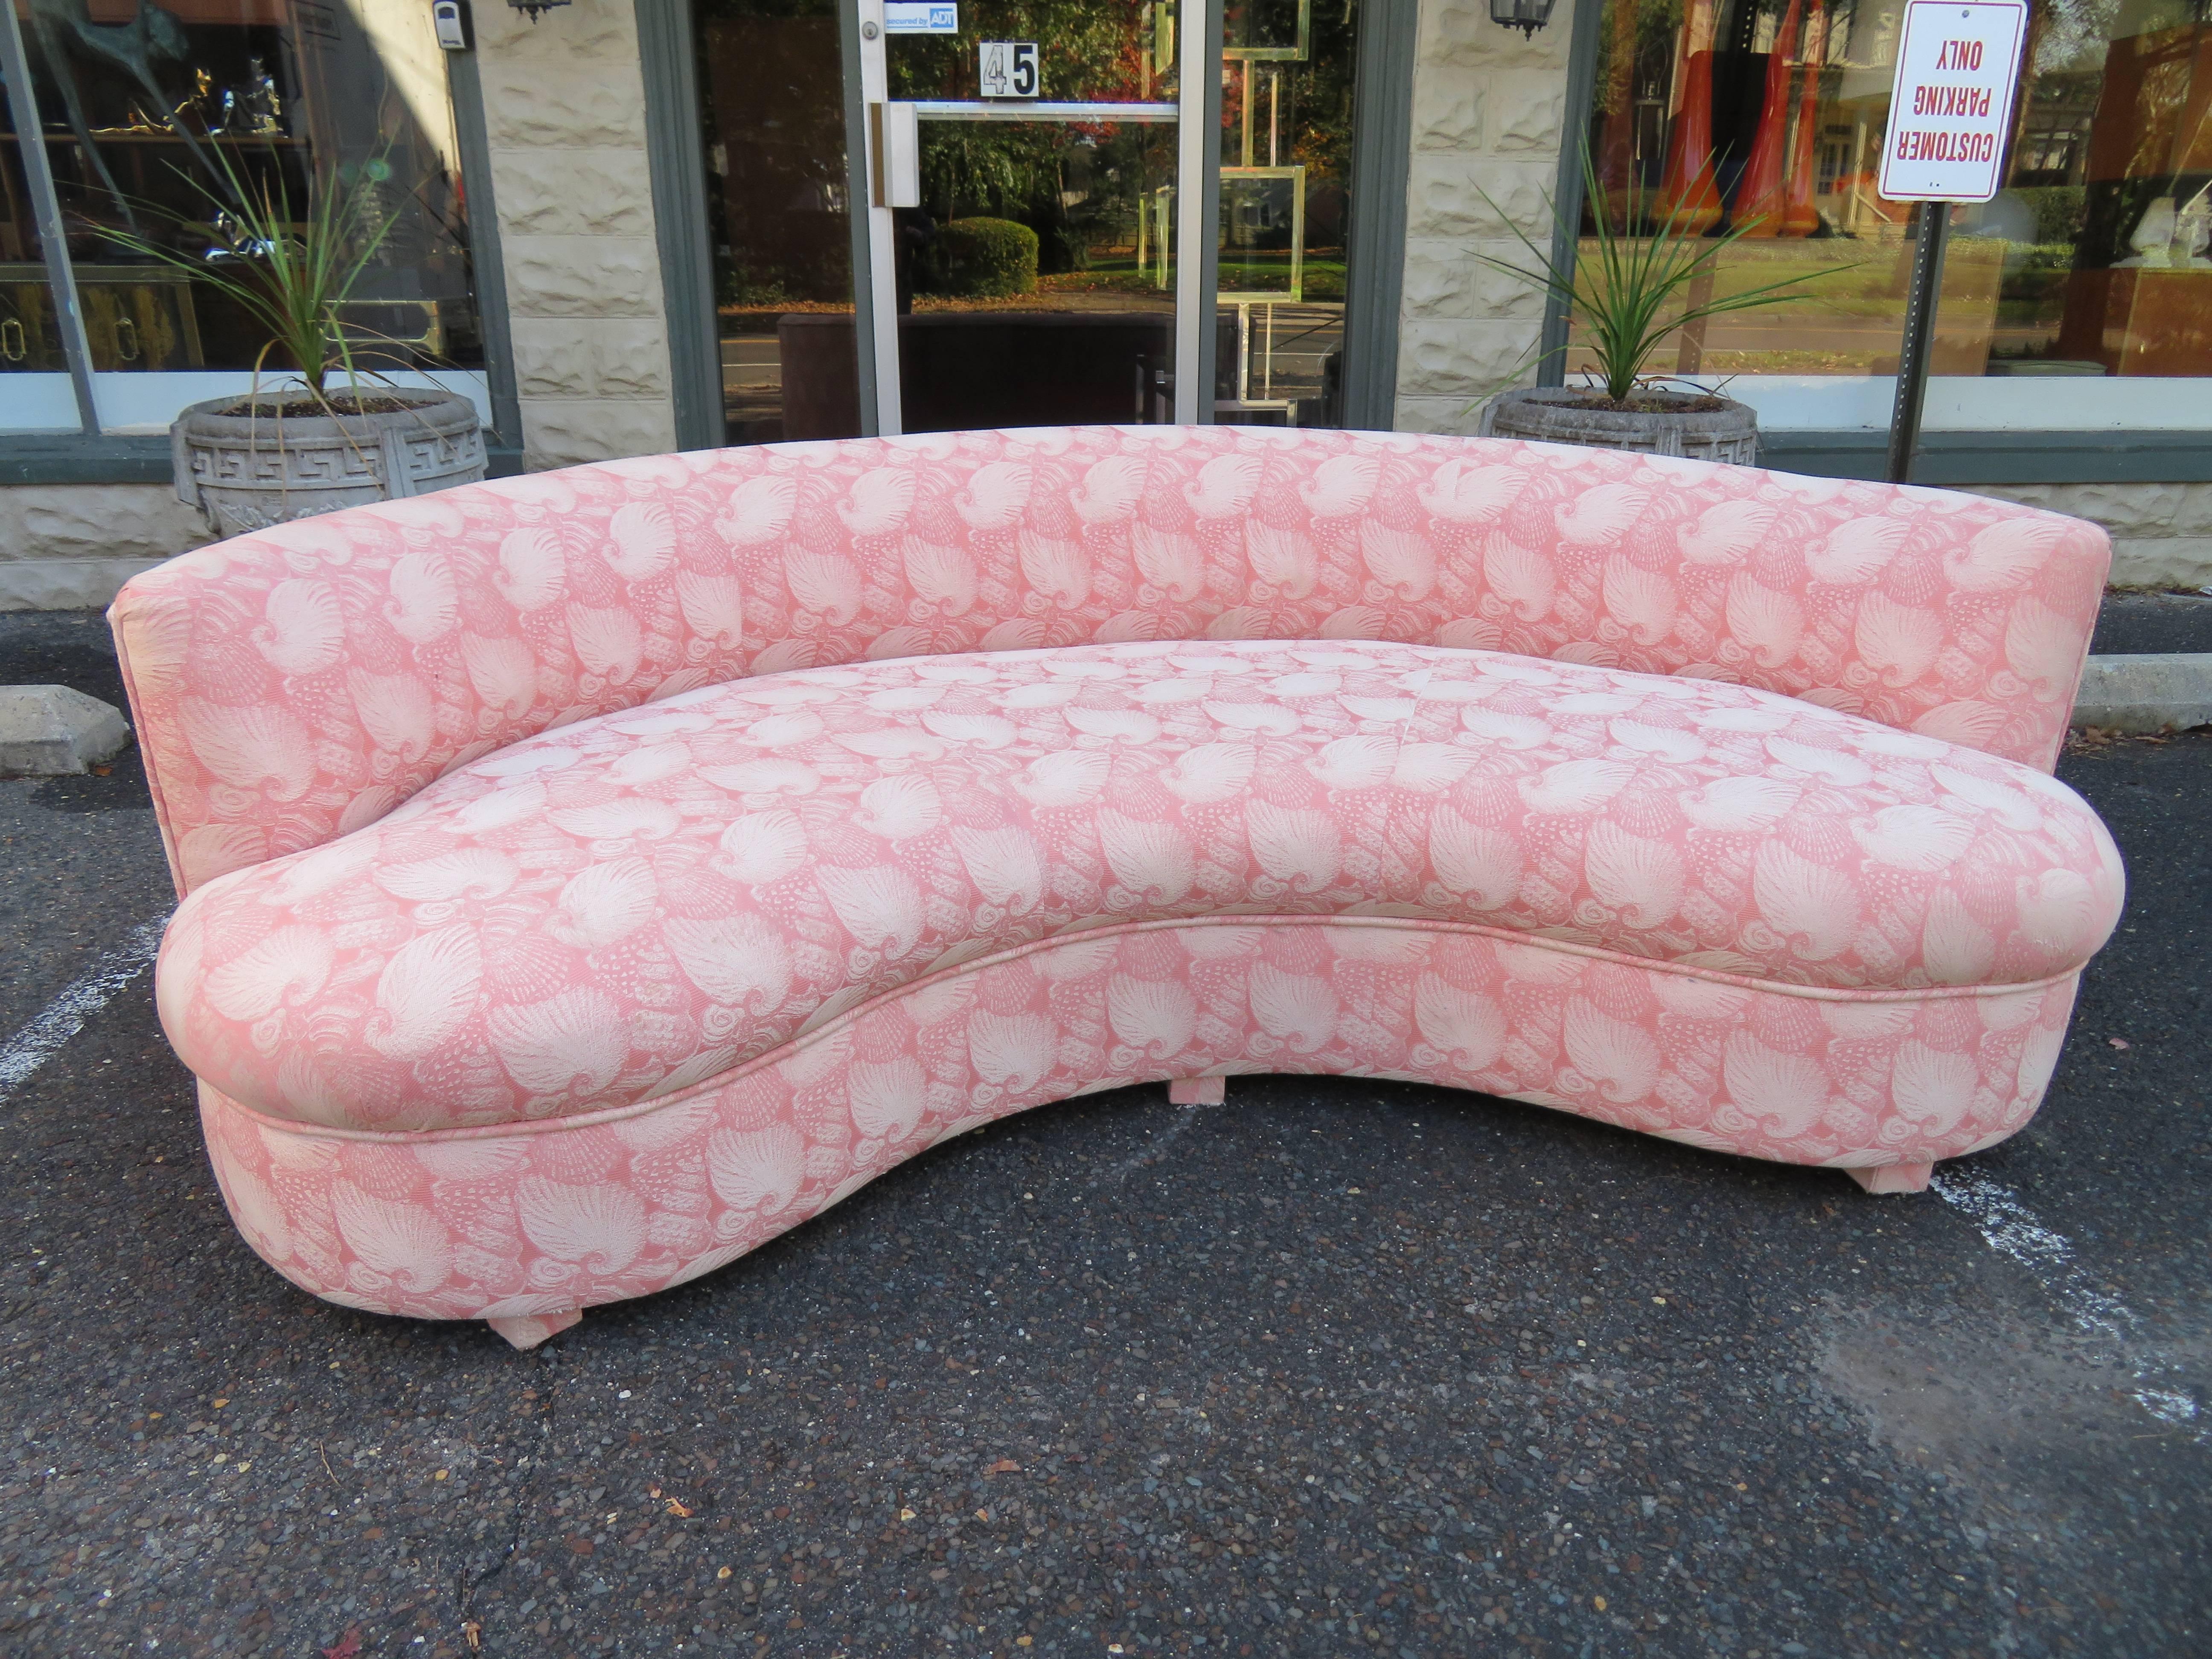 Stunning pair of Vladimir Kagan style curved kidney shaped sofas. The original pink sea shell fabric still looks nice but is a bit dated-reupholstery is recommended.